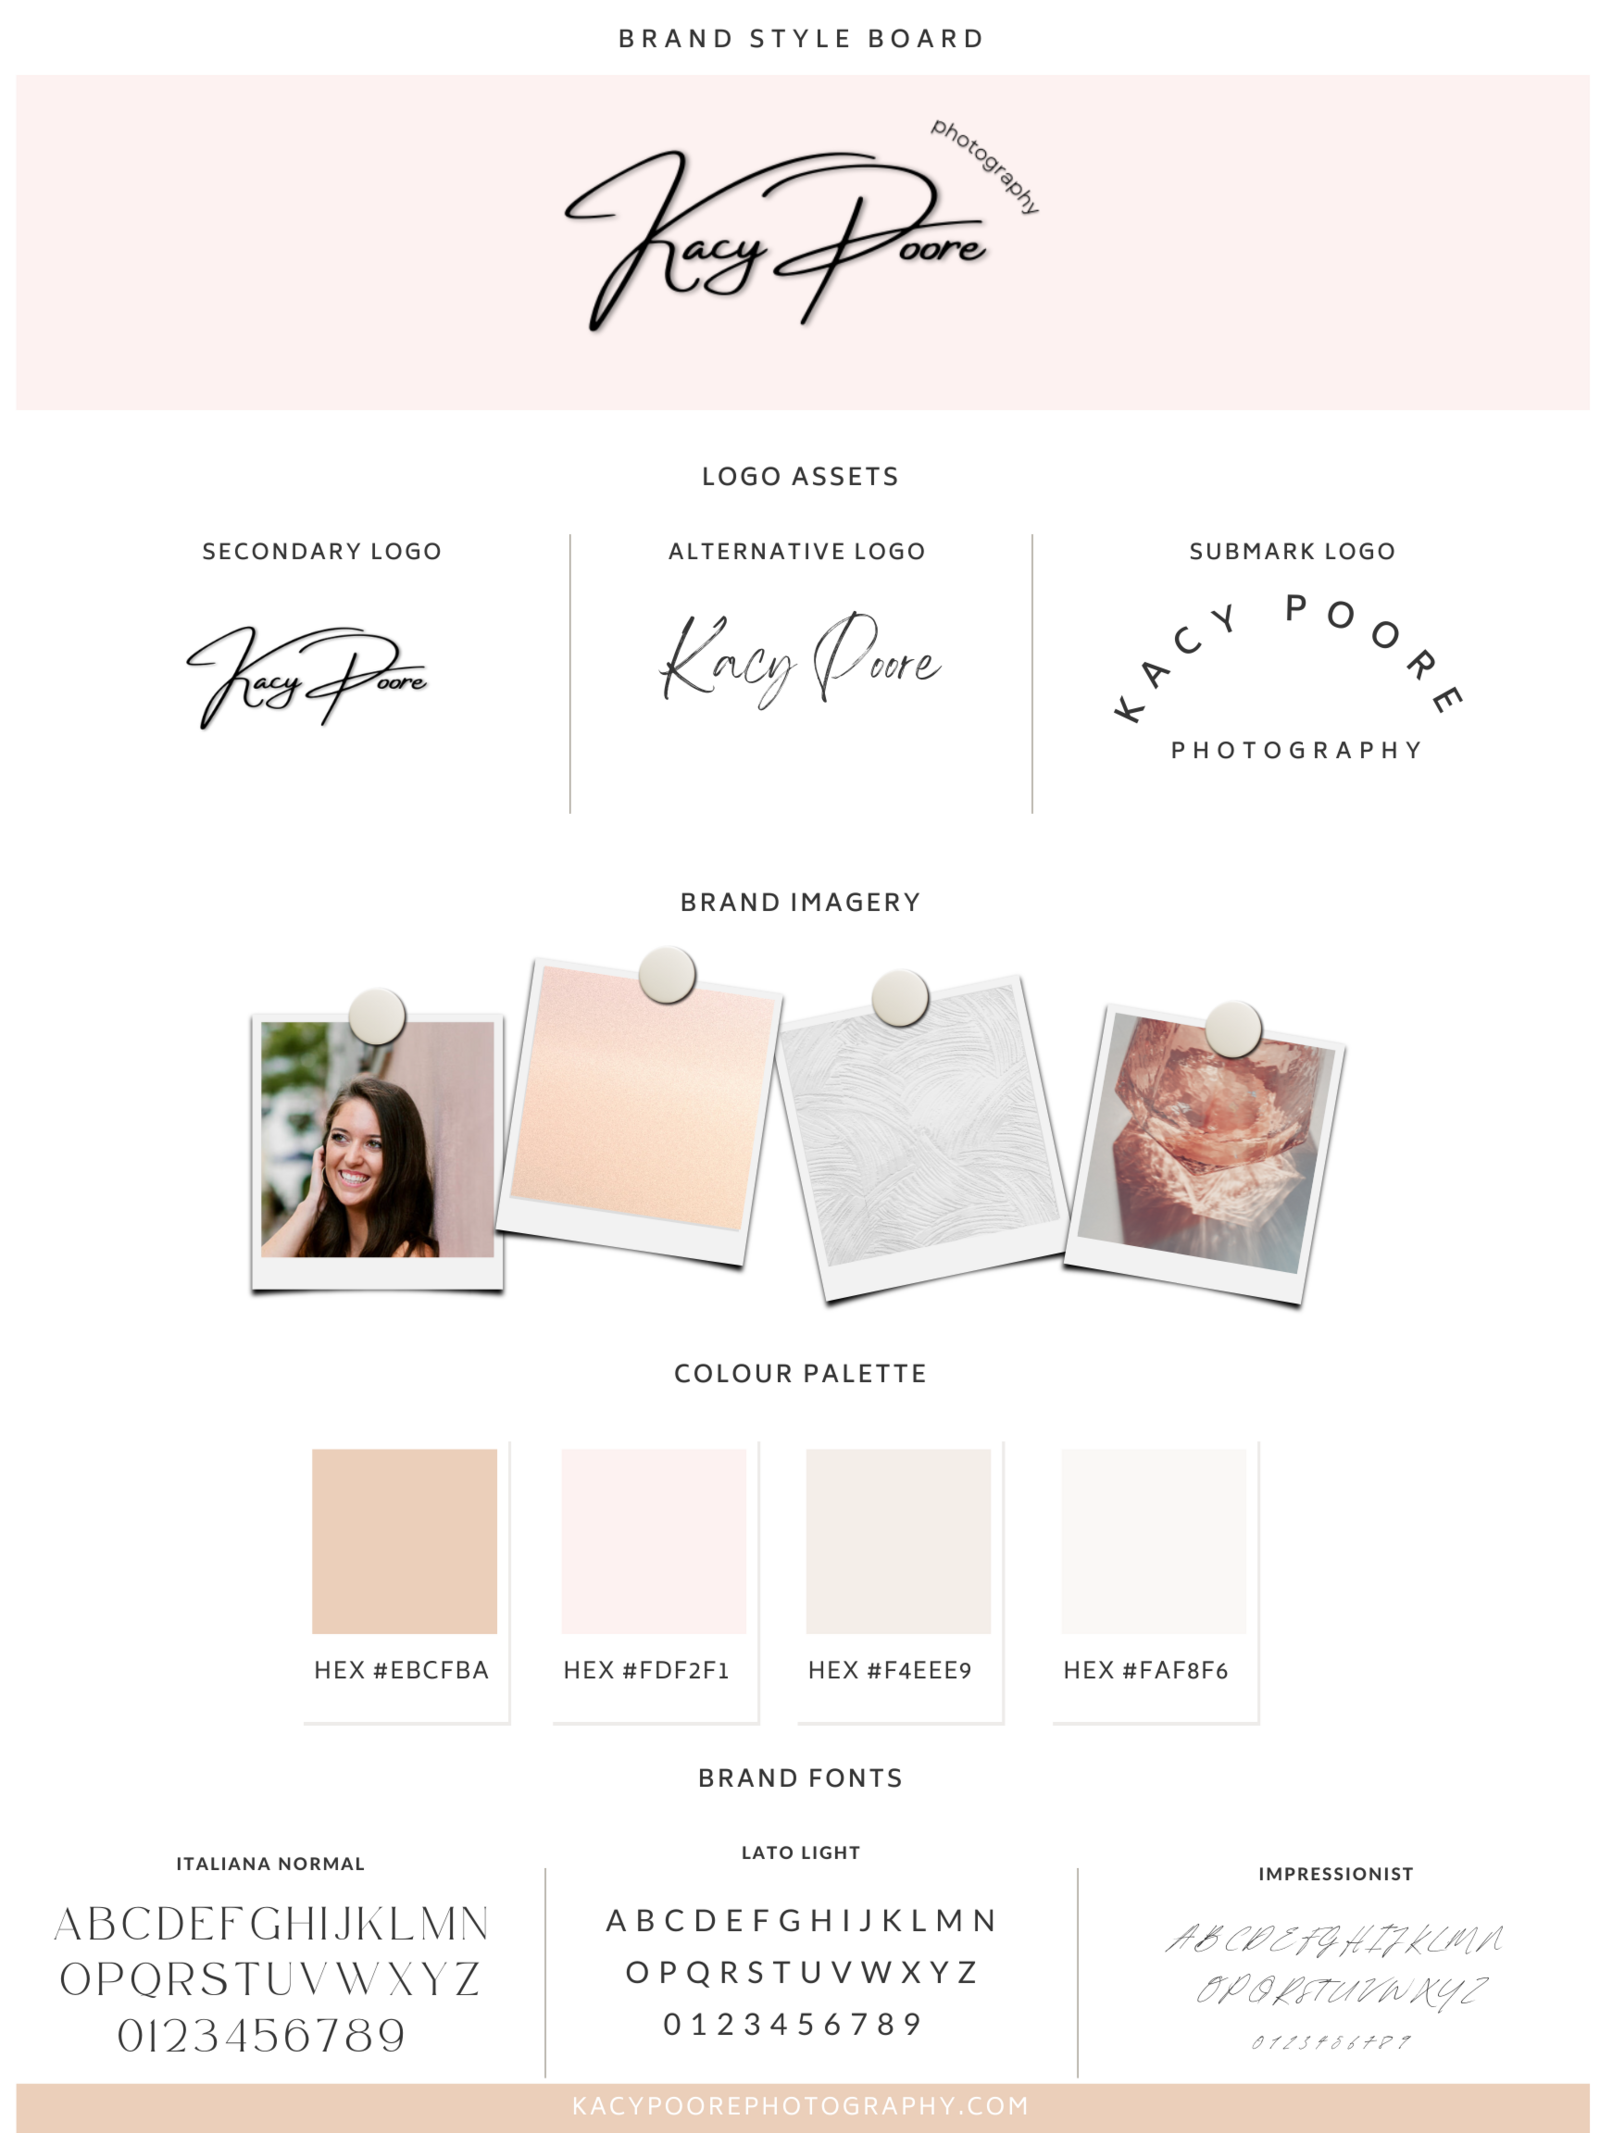 Kacy Poore Photography Brand Guide (1)